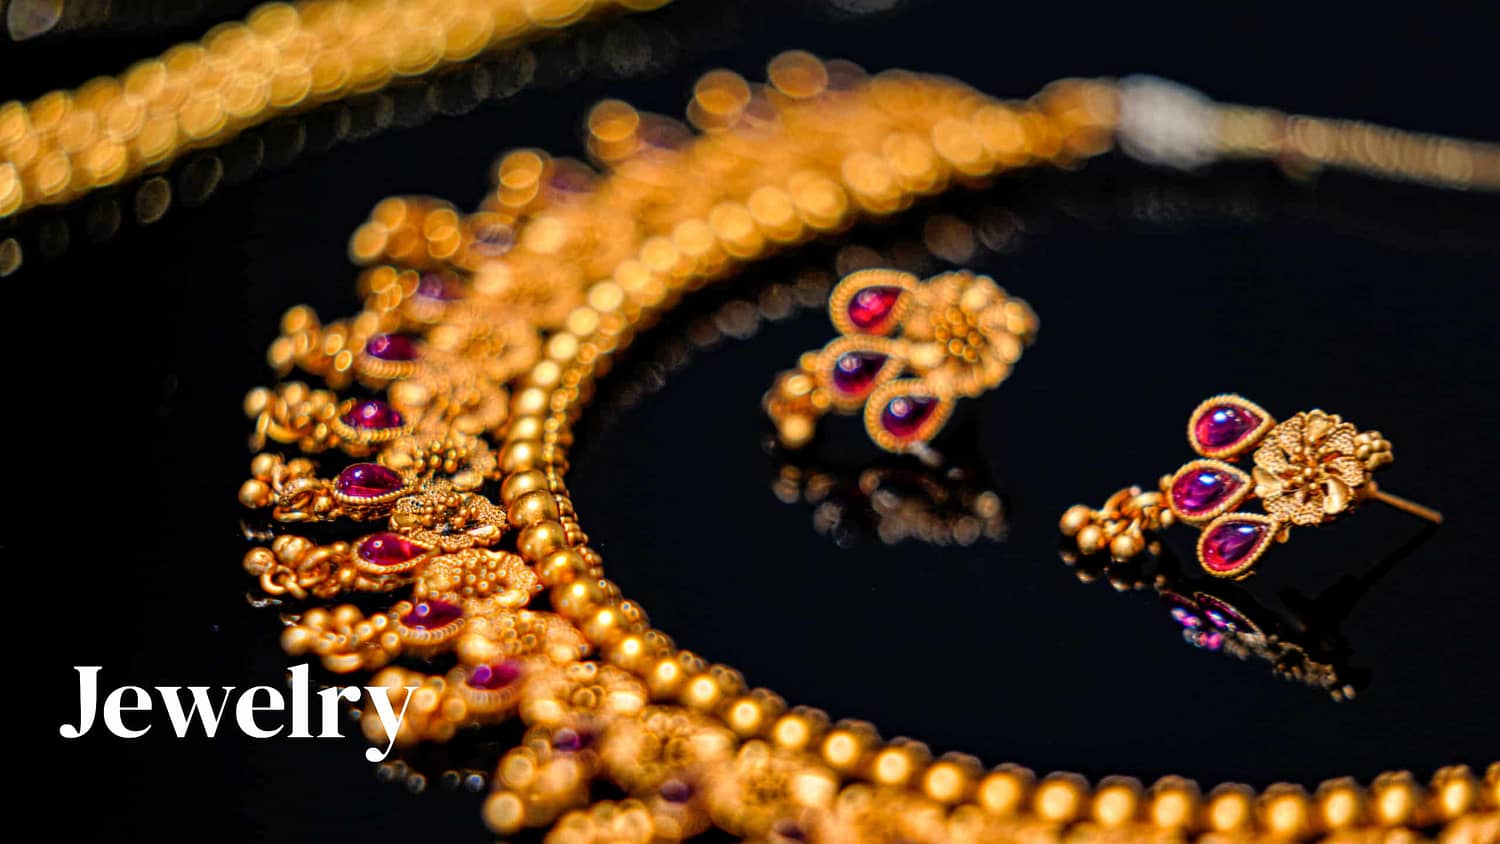 buy jewerly with bitcoin in panama